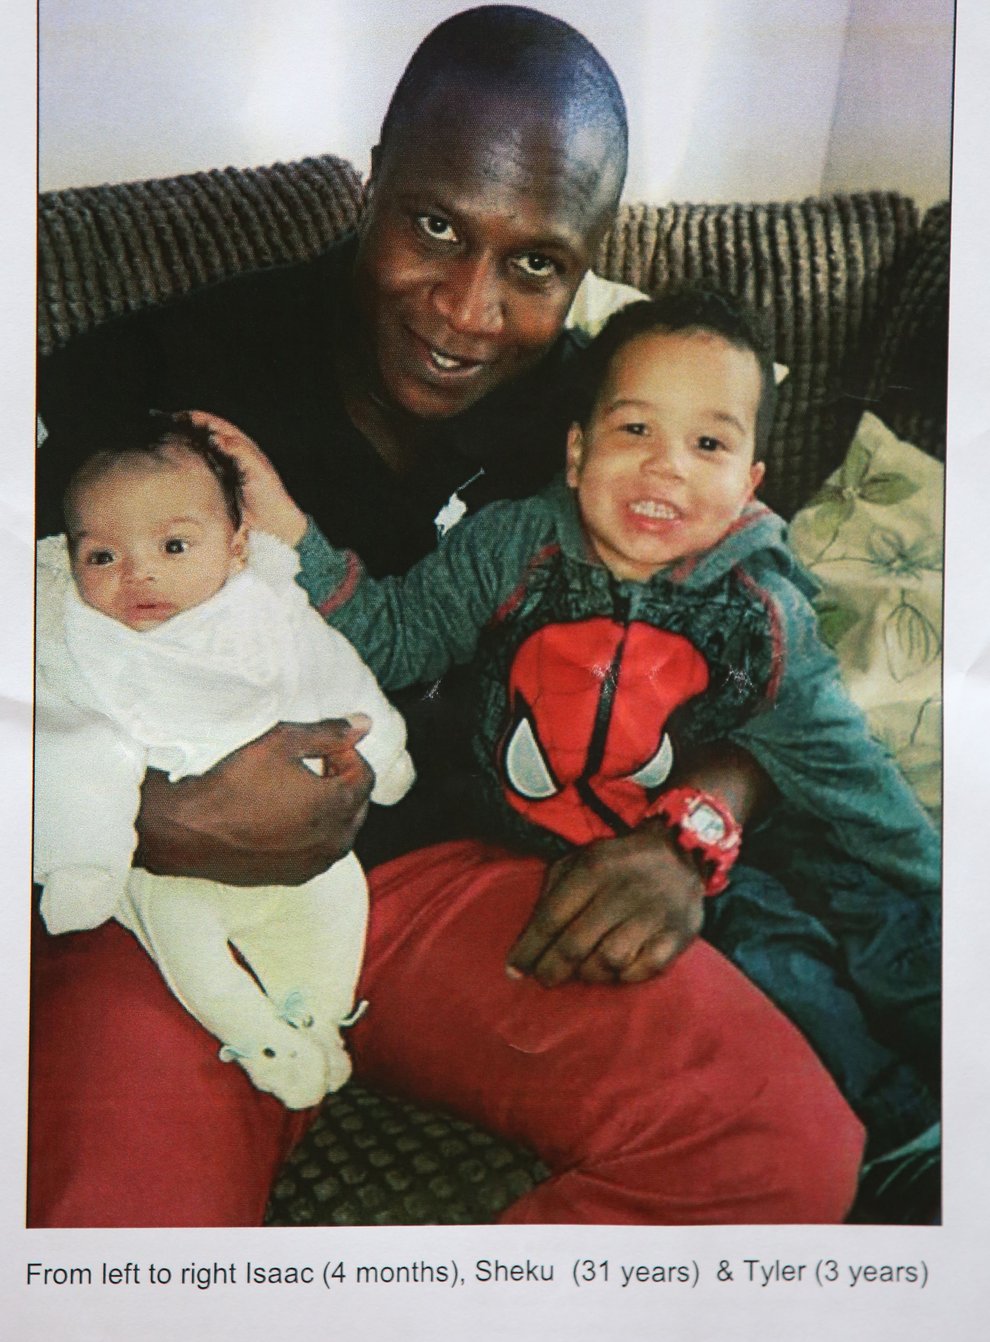 The public inquiry into the death of Sheku Bayoh begins on Tuesday (Family of Sheku Bayoh/PA)